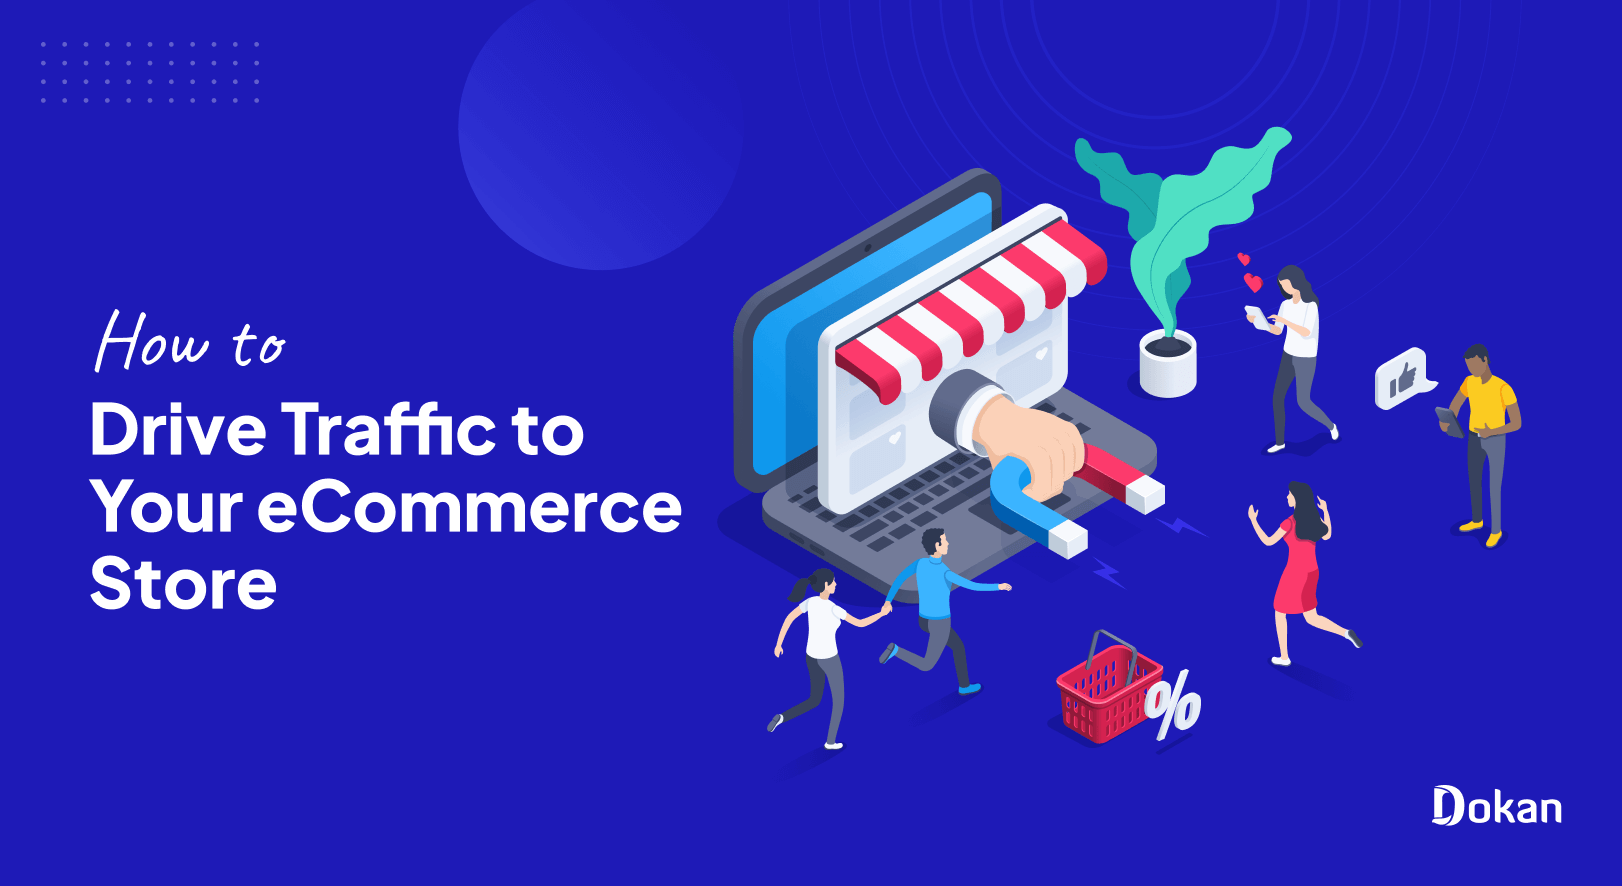 This is the feature image of the blog- How to Drive Traffic to Your eCommerce Store